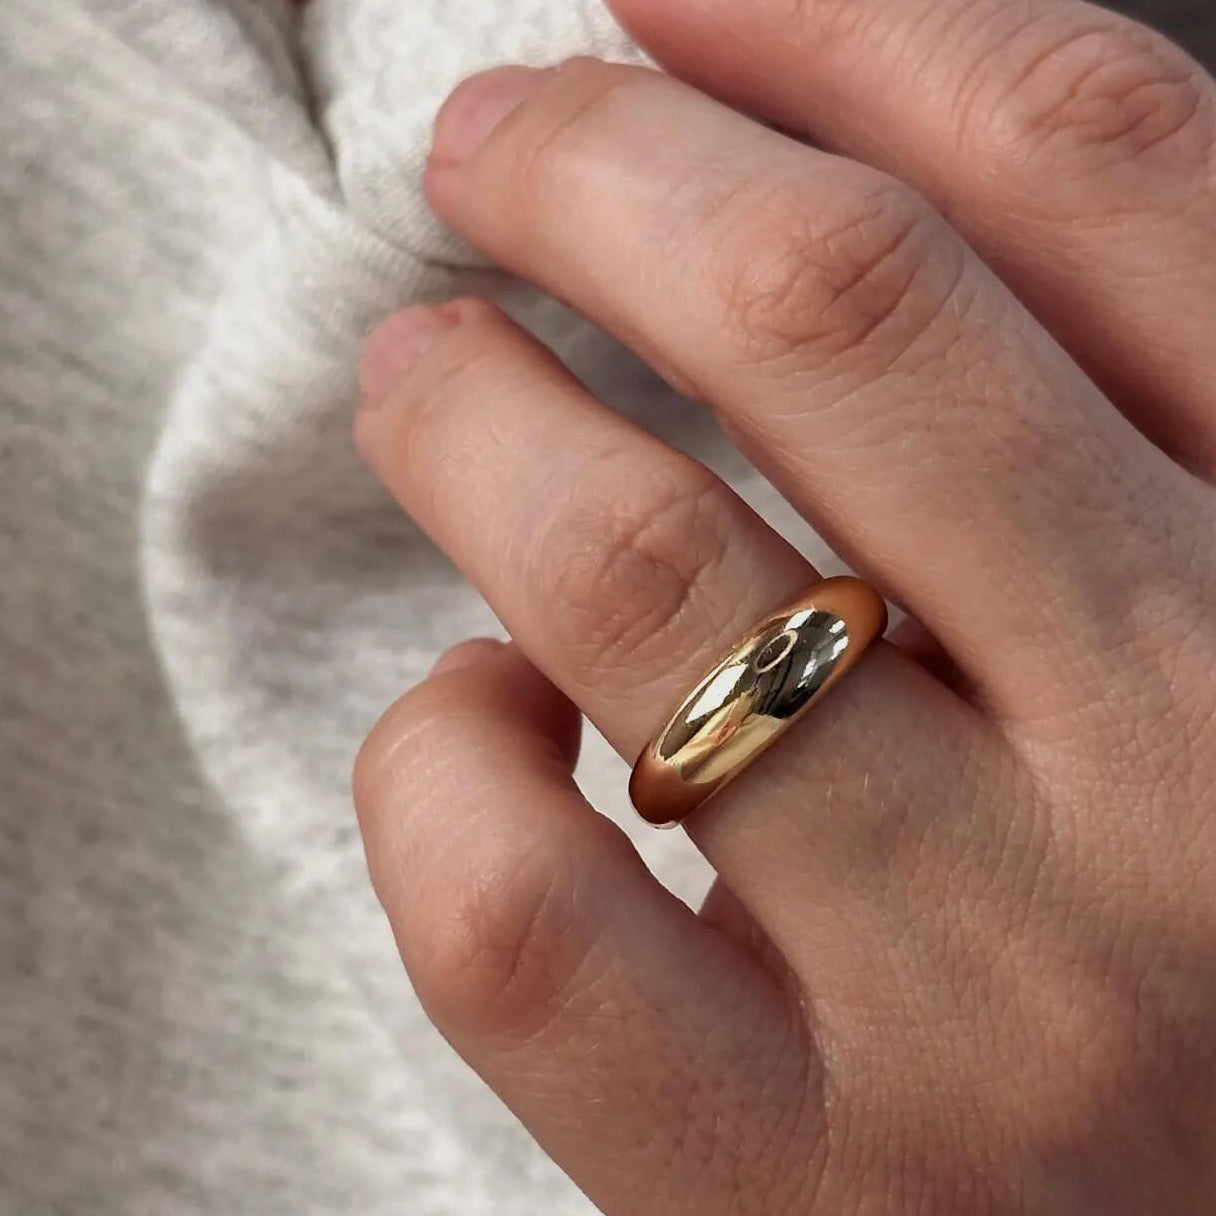 18k Gold Filled Mini Polished Dome Ring